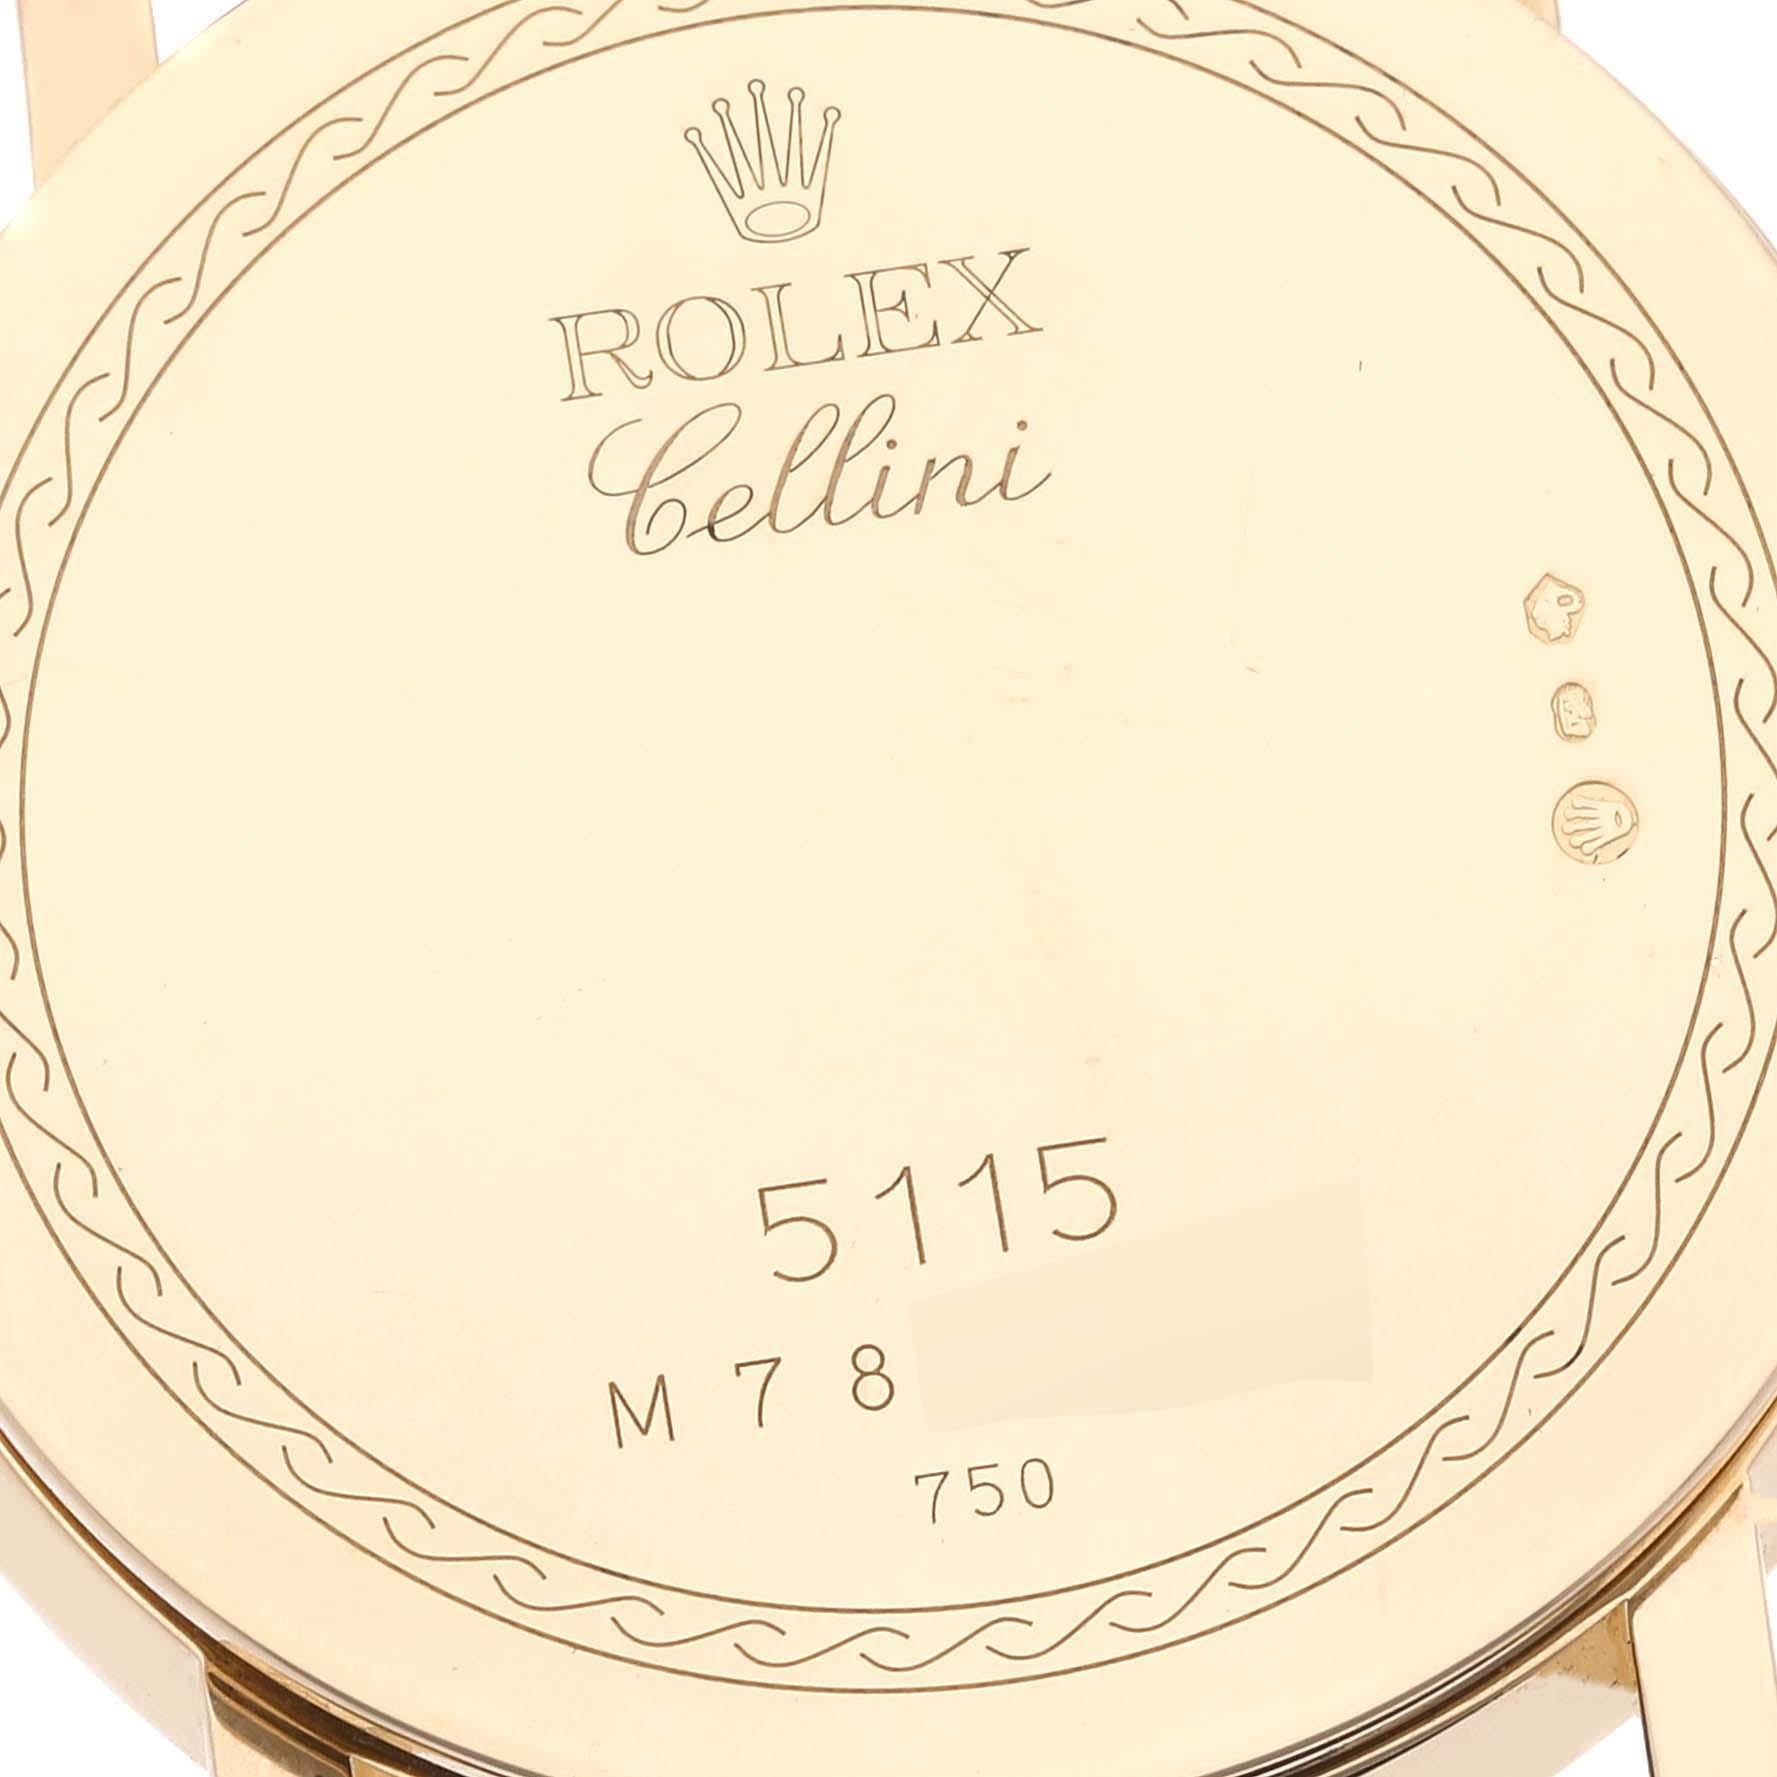 Rolex Cellini Classic Yellow Gold Ivory Anniversary Dial Mens Watch 5115 2